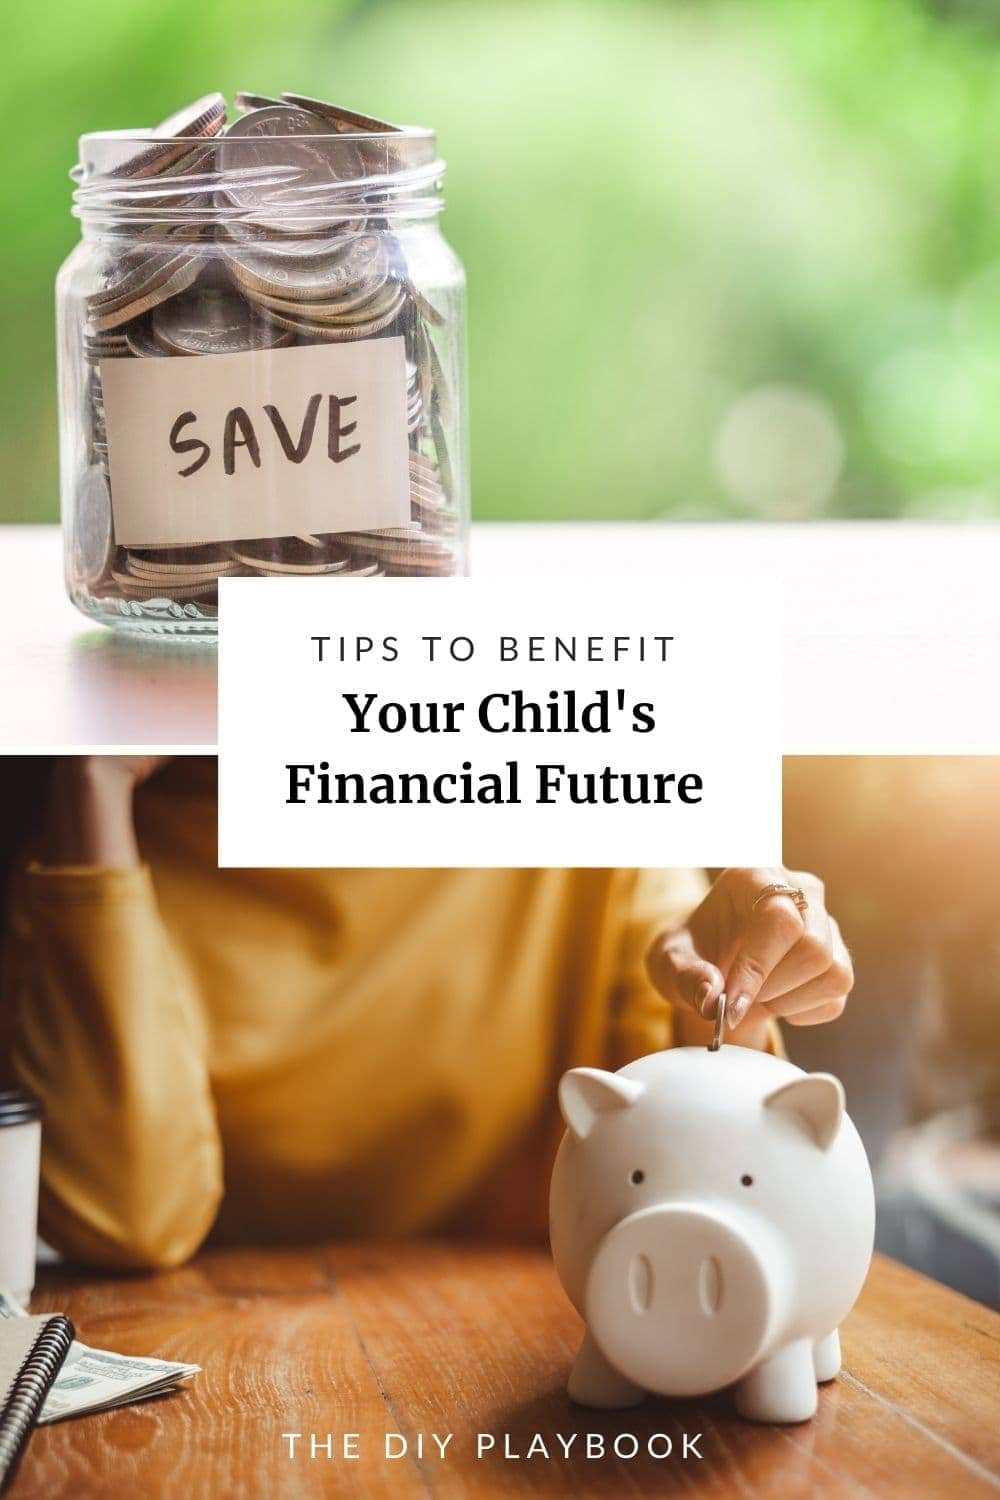 Best tips to benefit your child's financial future